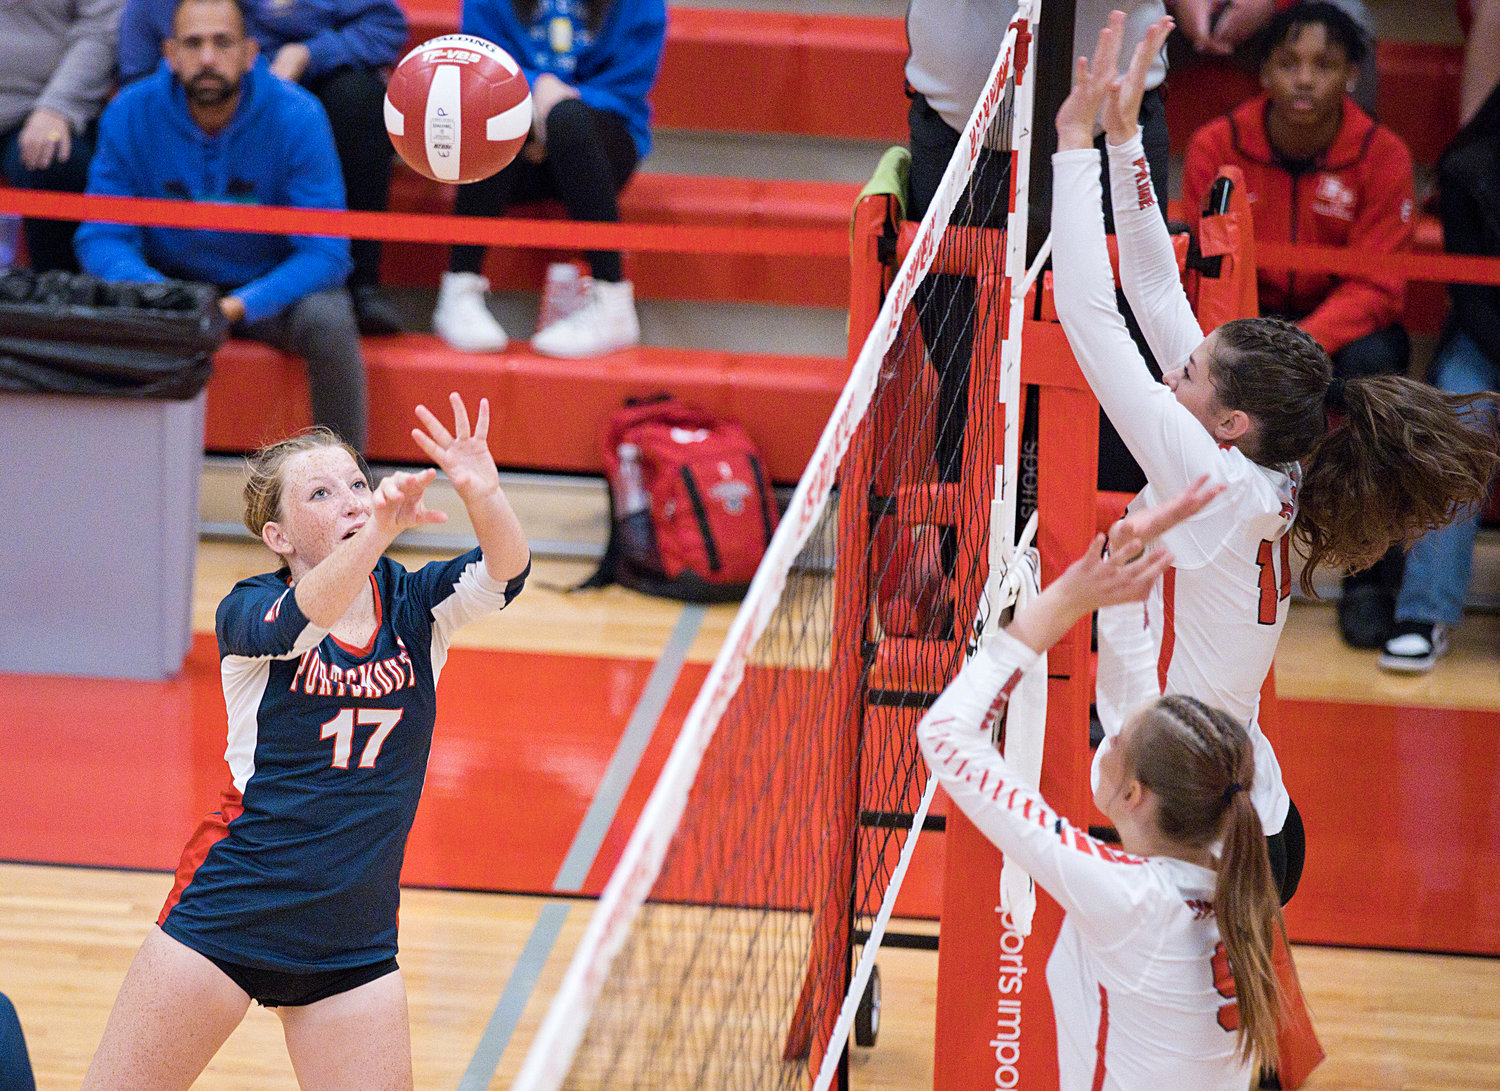 Avery Pelletier sets the ball over the net.